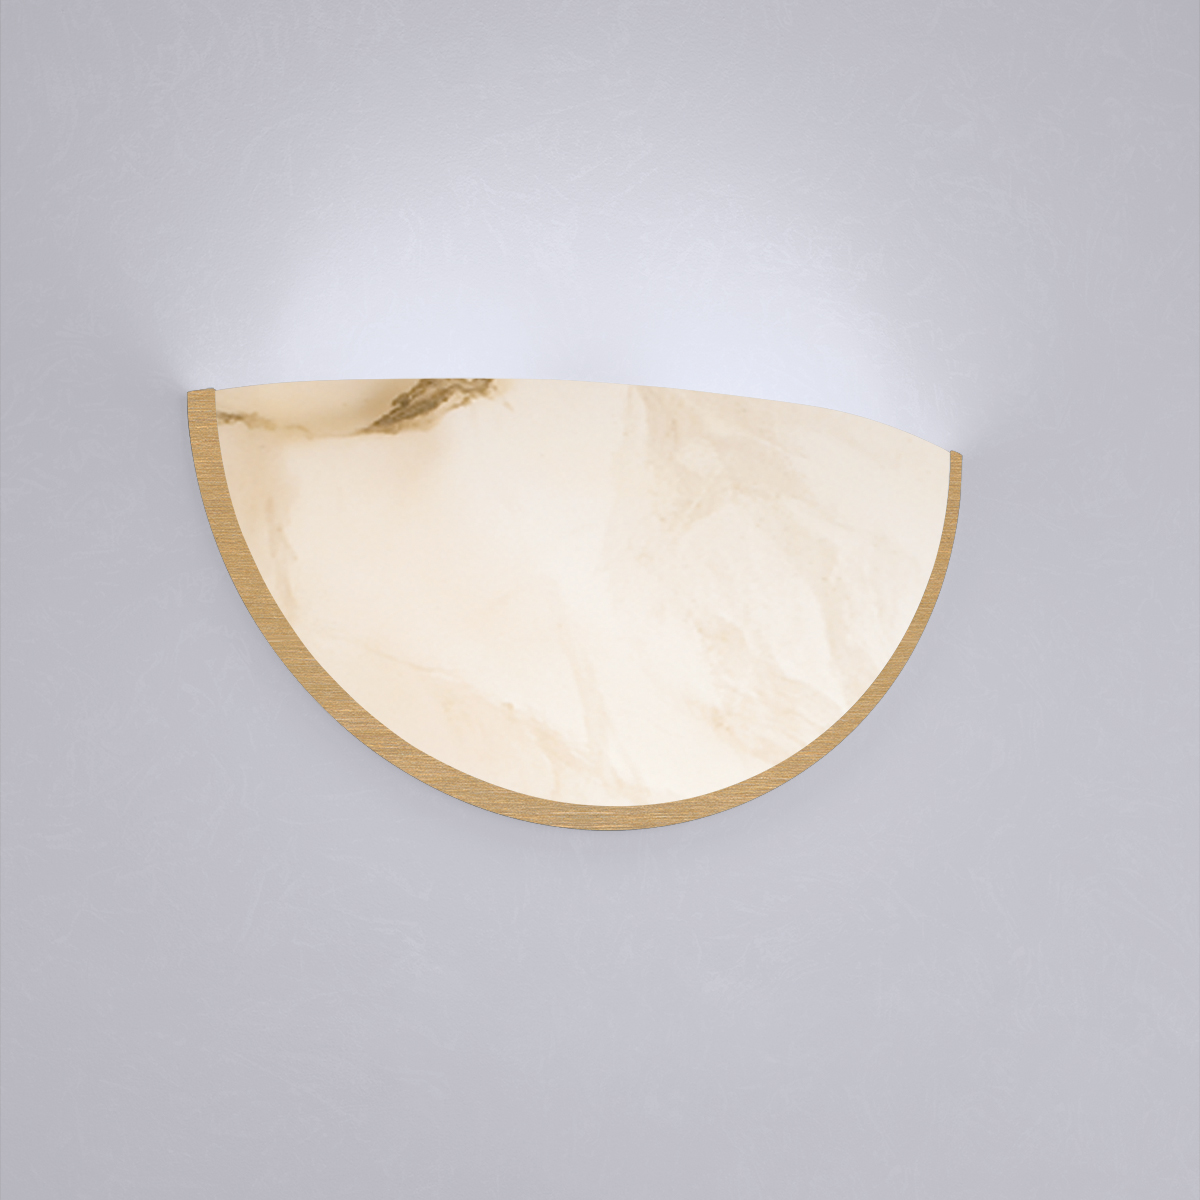 A clean, luminous quarter sphere wall sconce with minimal trim